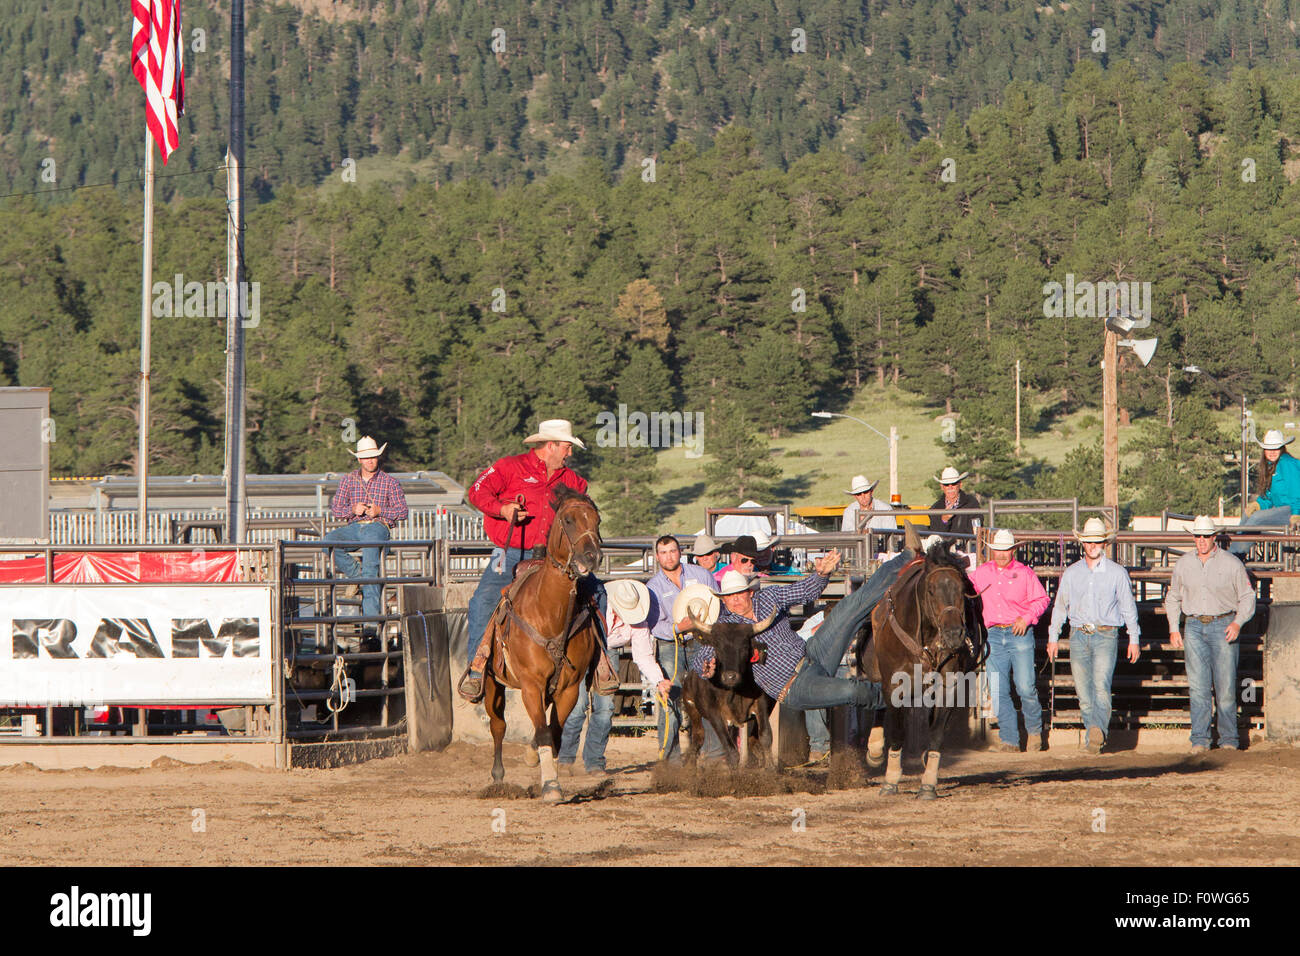 Estes Park, Colorado - Steer wrestling at the Rooftop Rodeo. Stock Photo